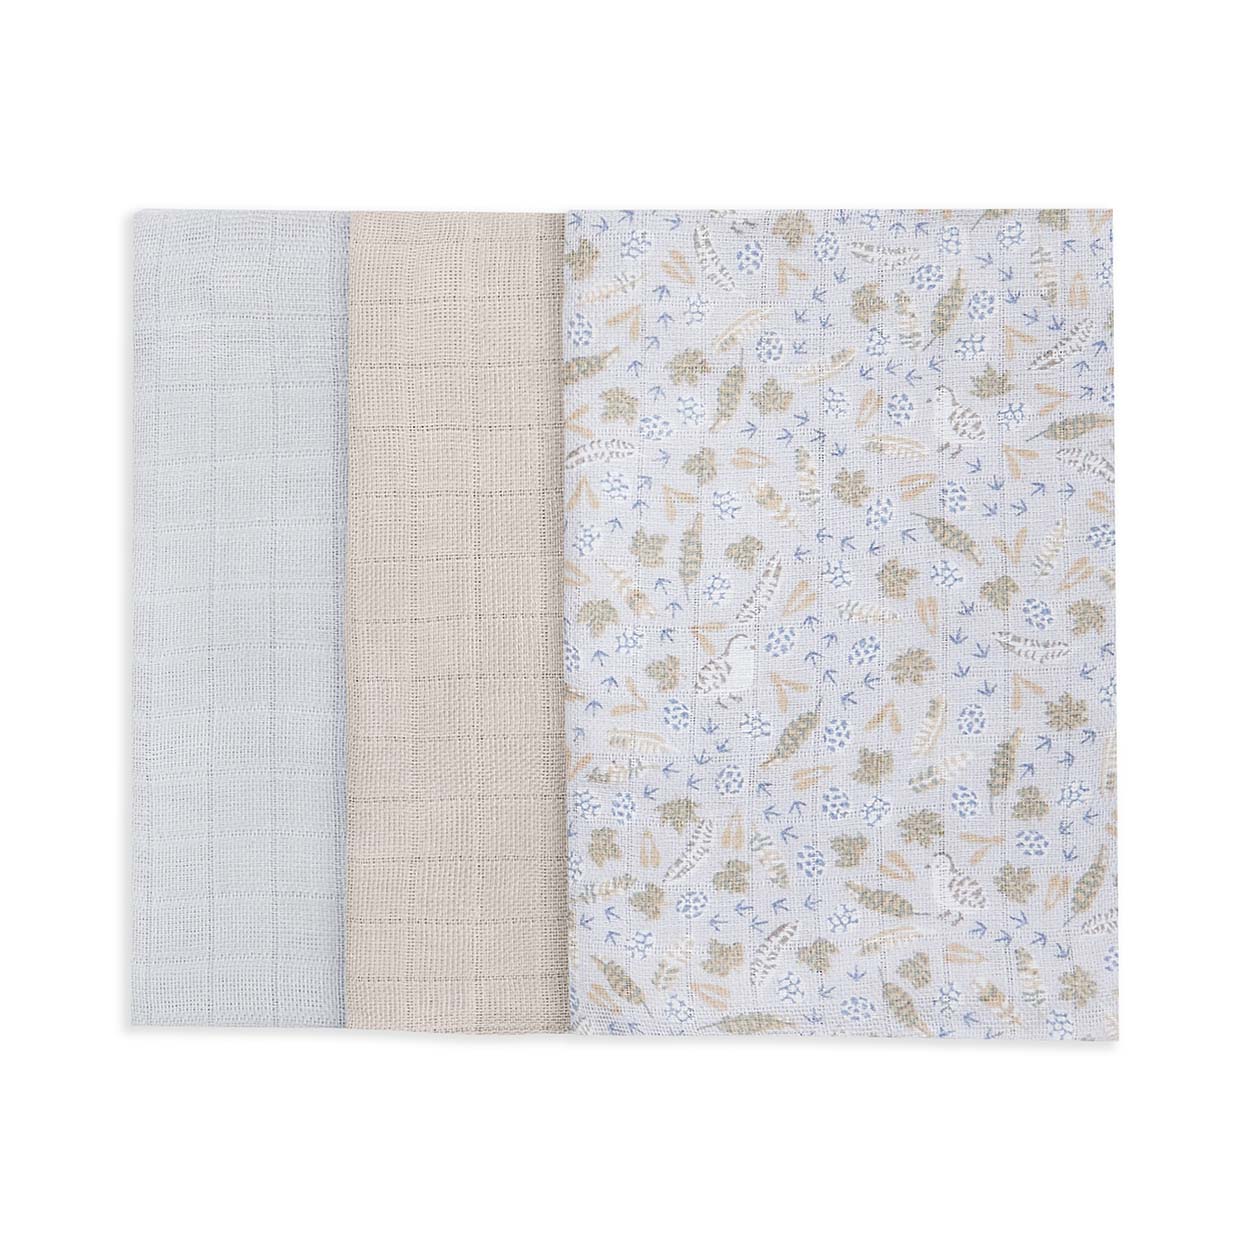 Set of 3 organic muslin square in beige, light blue and woodland print